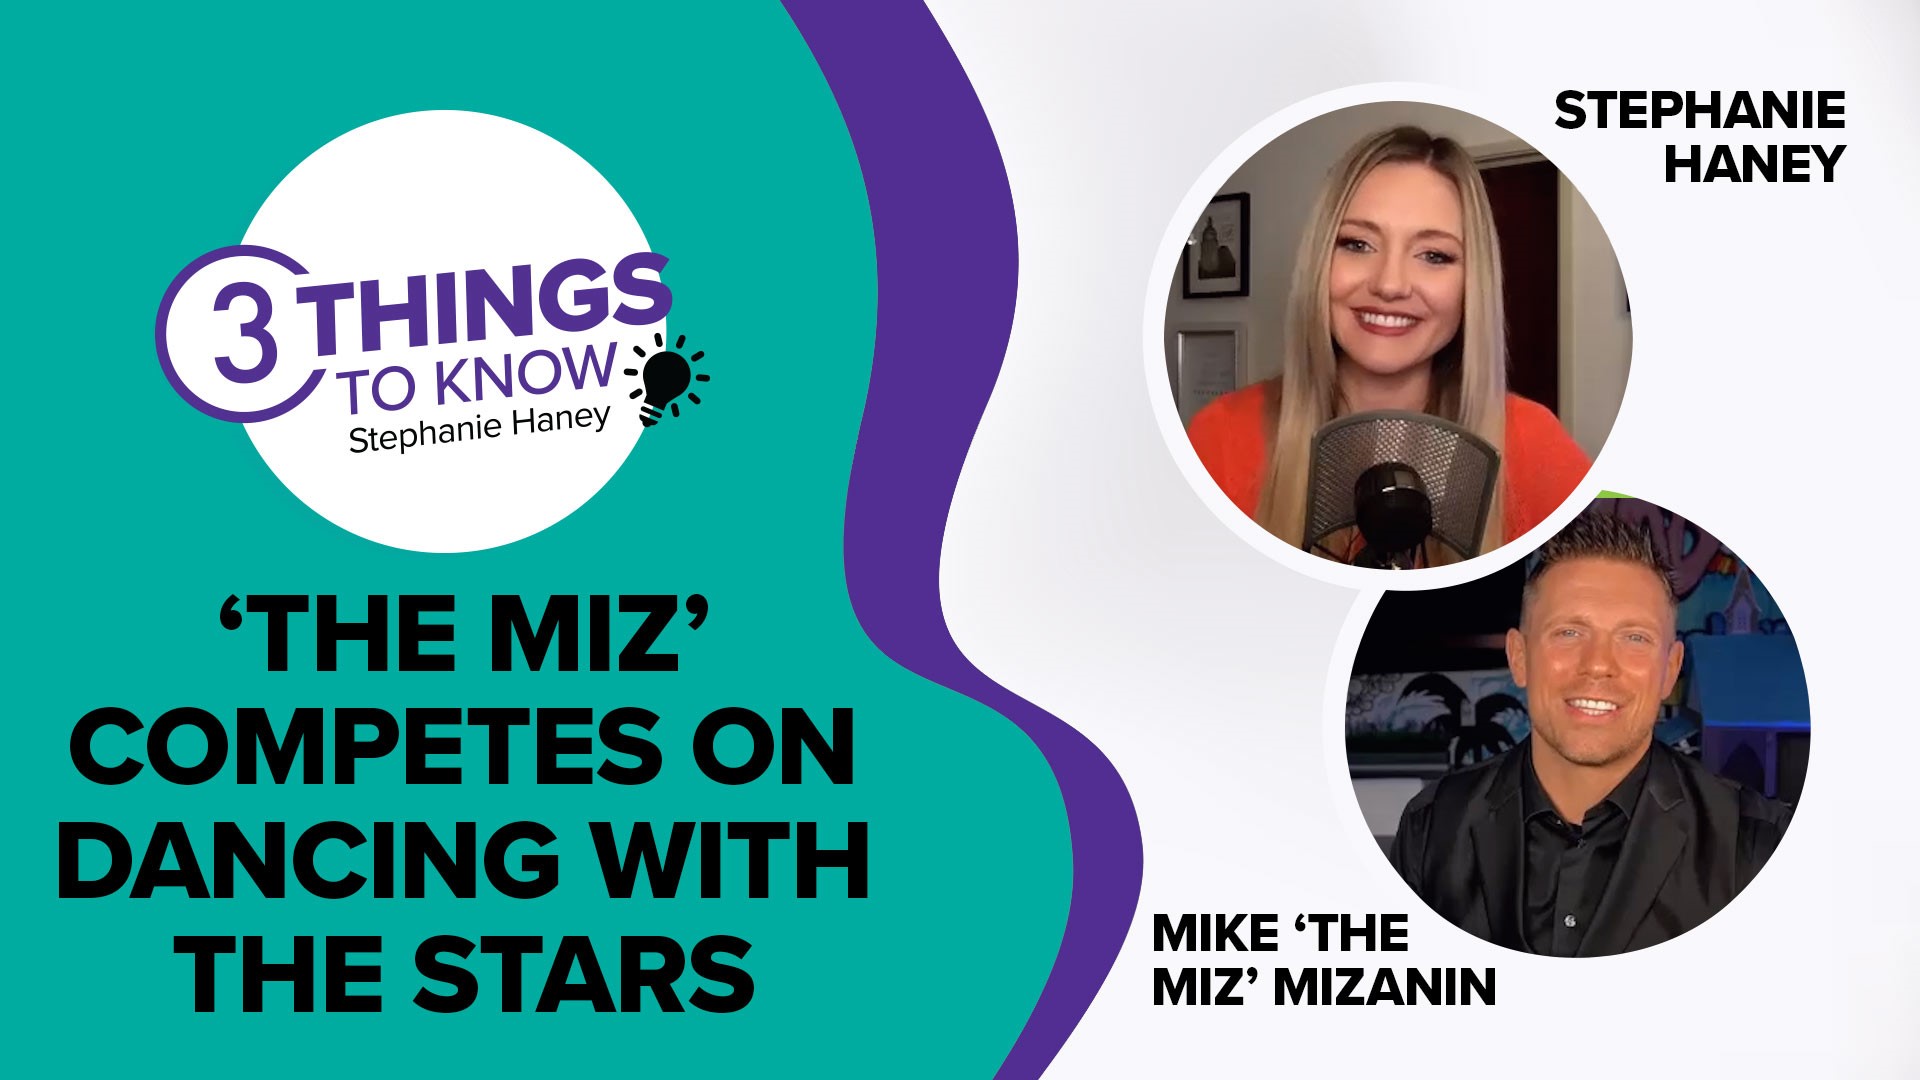 WWE Superstar Mike "The Miz" Mizanin did his homework while preparing to compete on ABC's Dancing With the Stars